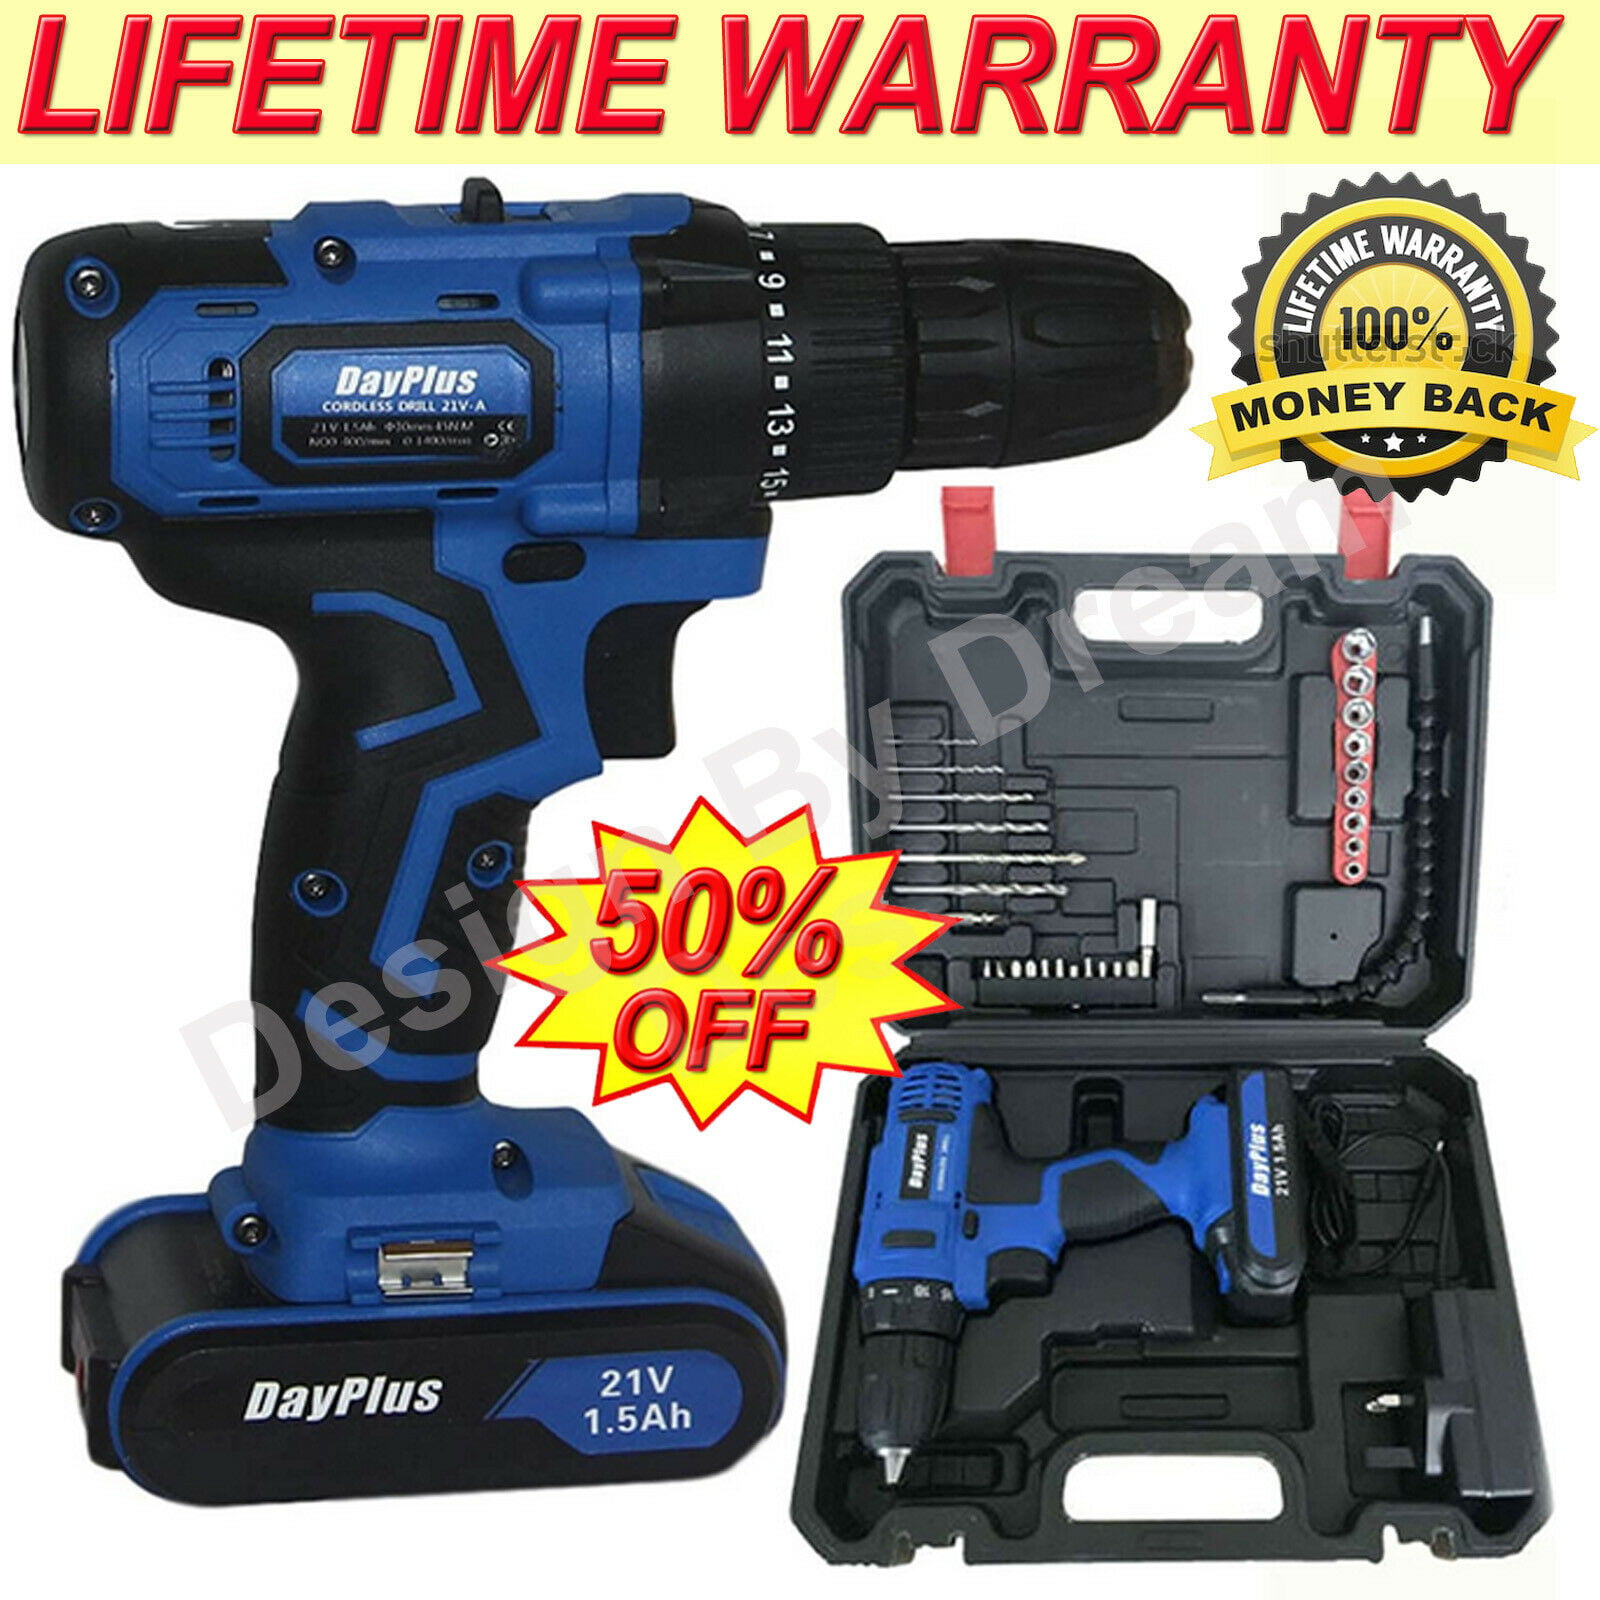 Heavy Duty 21V Cordless Combi Drill Screwdriver Dual Speed Li-Ion Fast Charge 